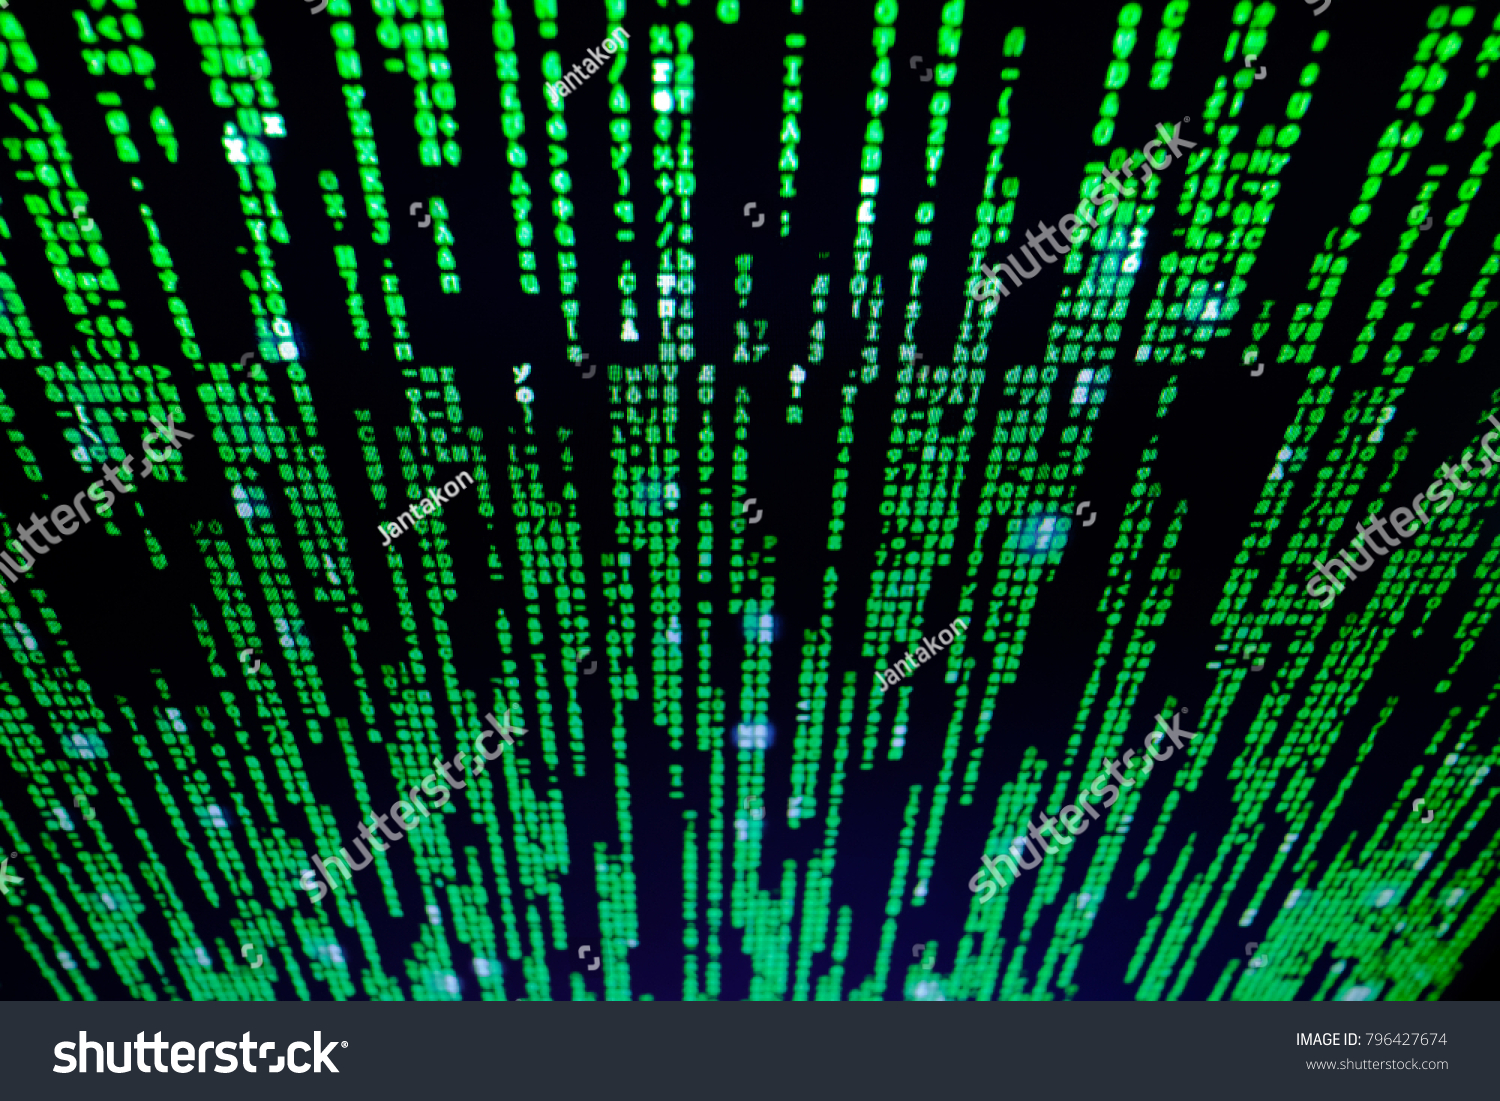 Background A Matrix Style Computer Virus And Hacker Screen Wallpaper Green Is Dominant Color